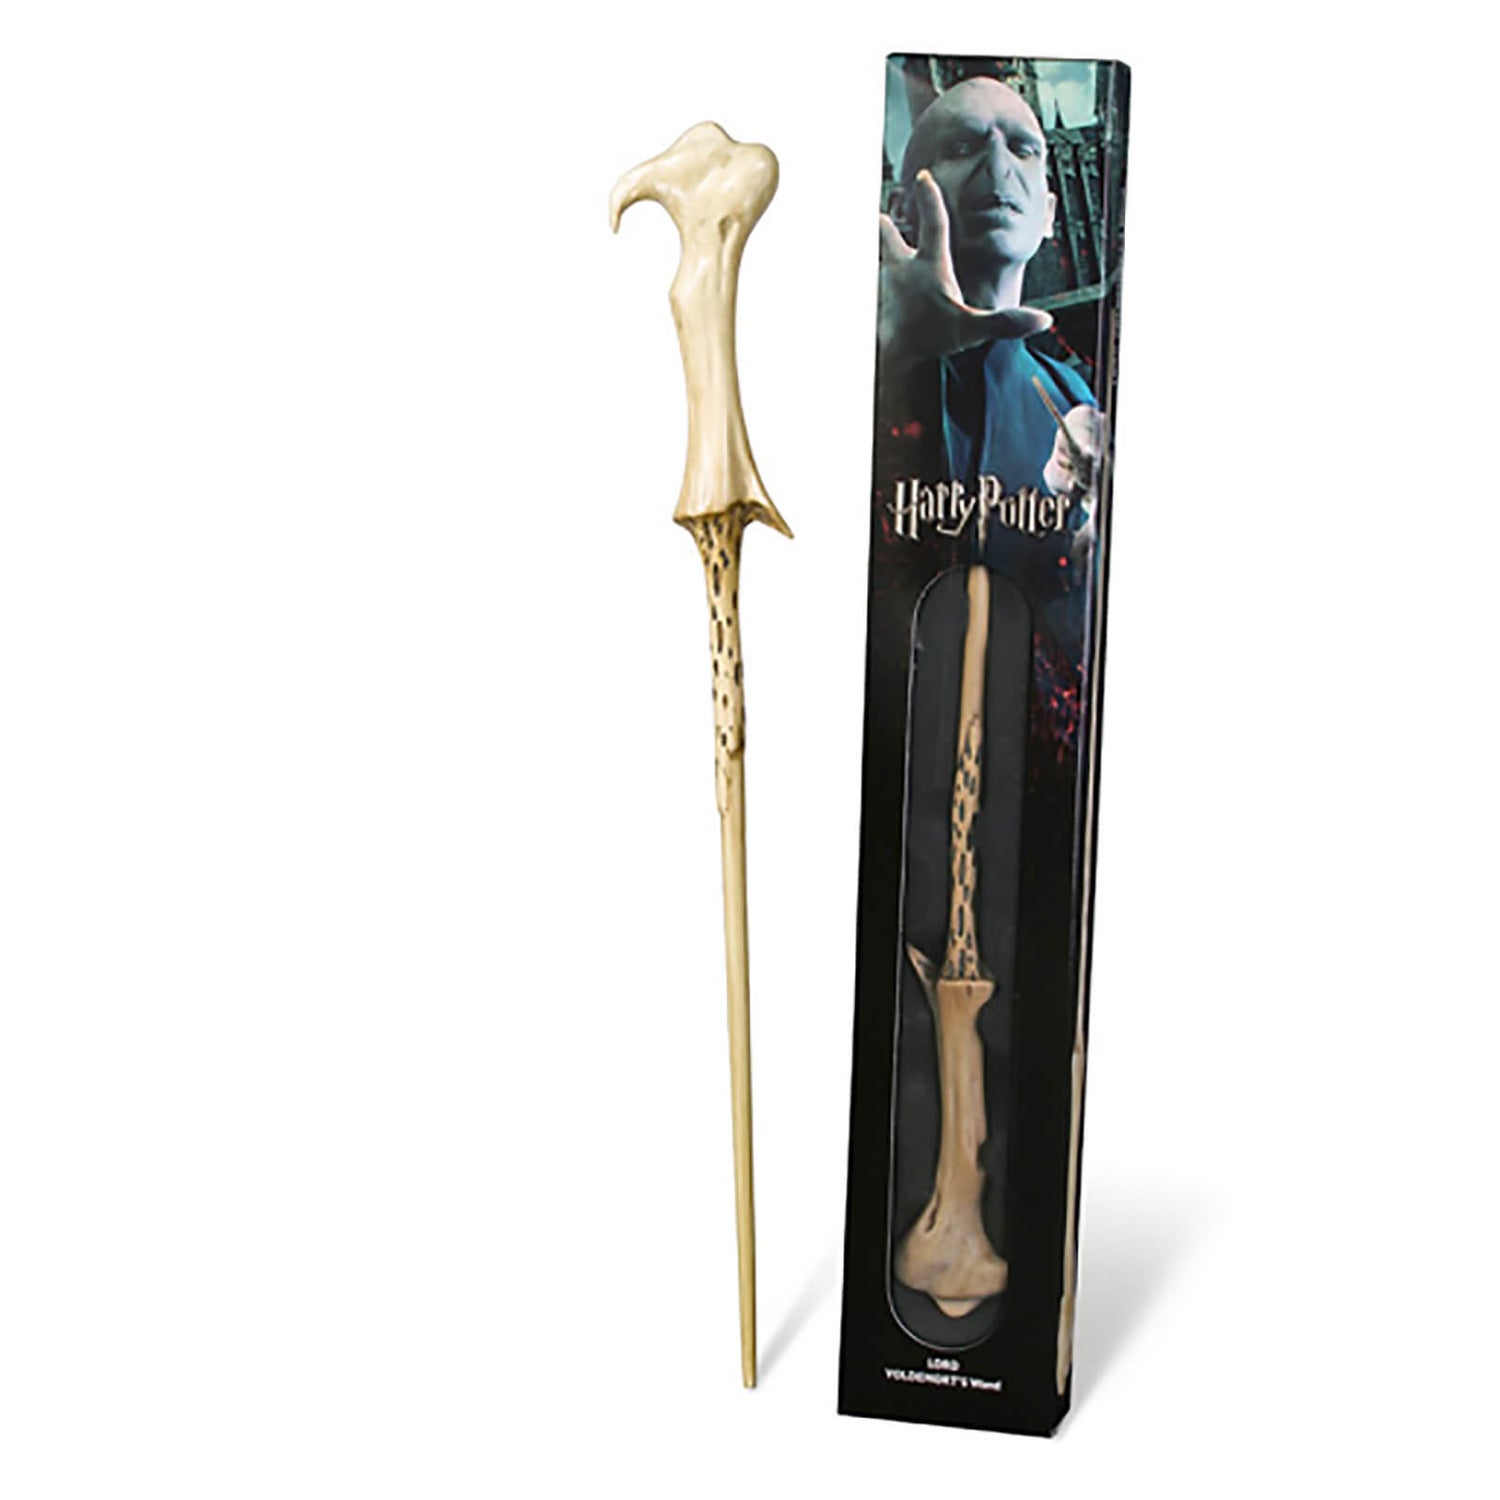 Harry Potter Lord Voldemort's Wand with Window Box